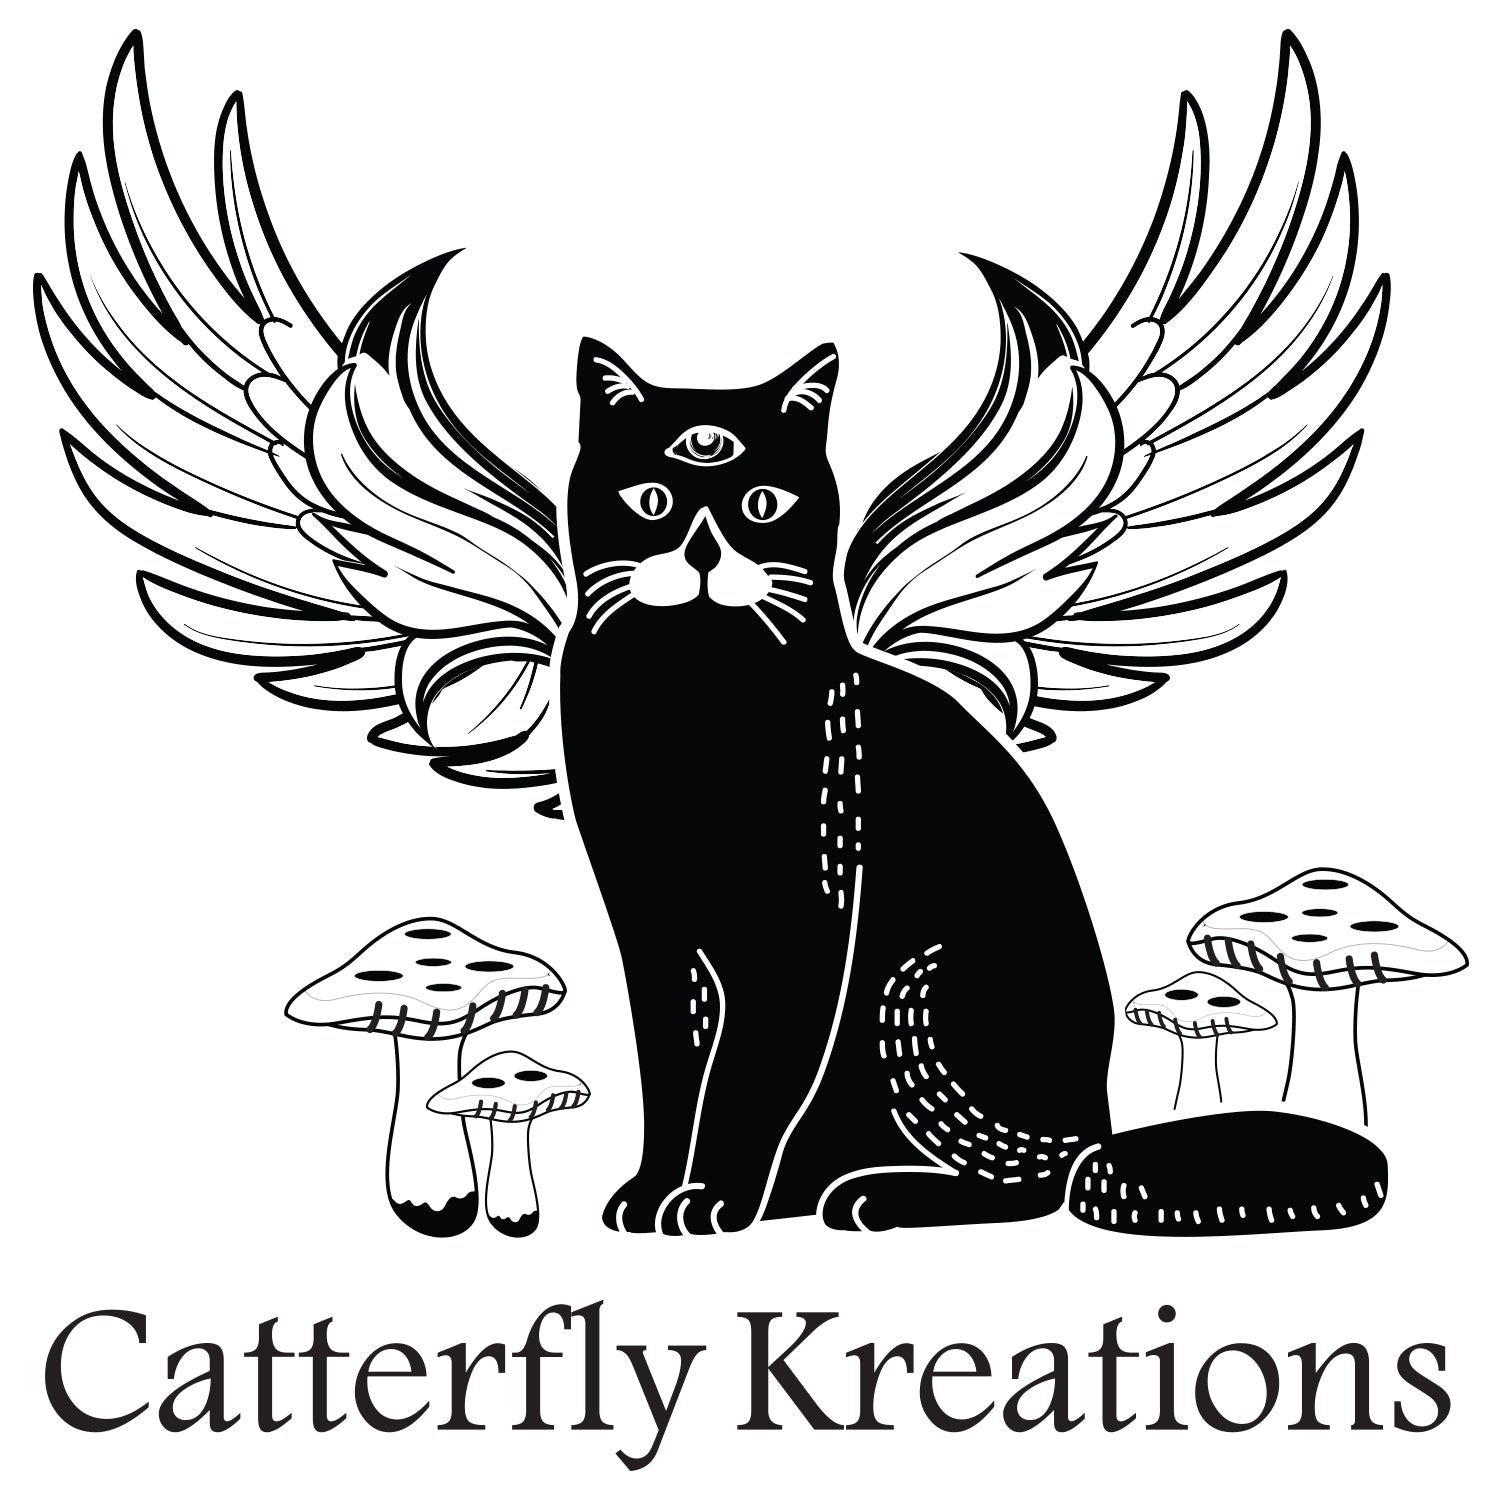 Catterfly Kreations Cat with Wings mushrooms and third eye.